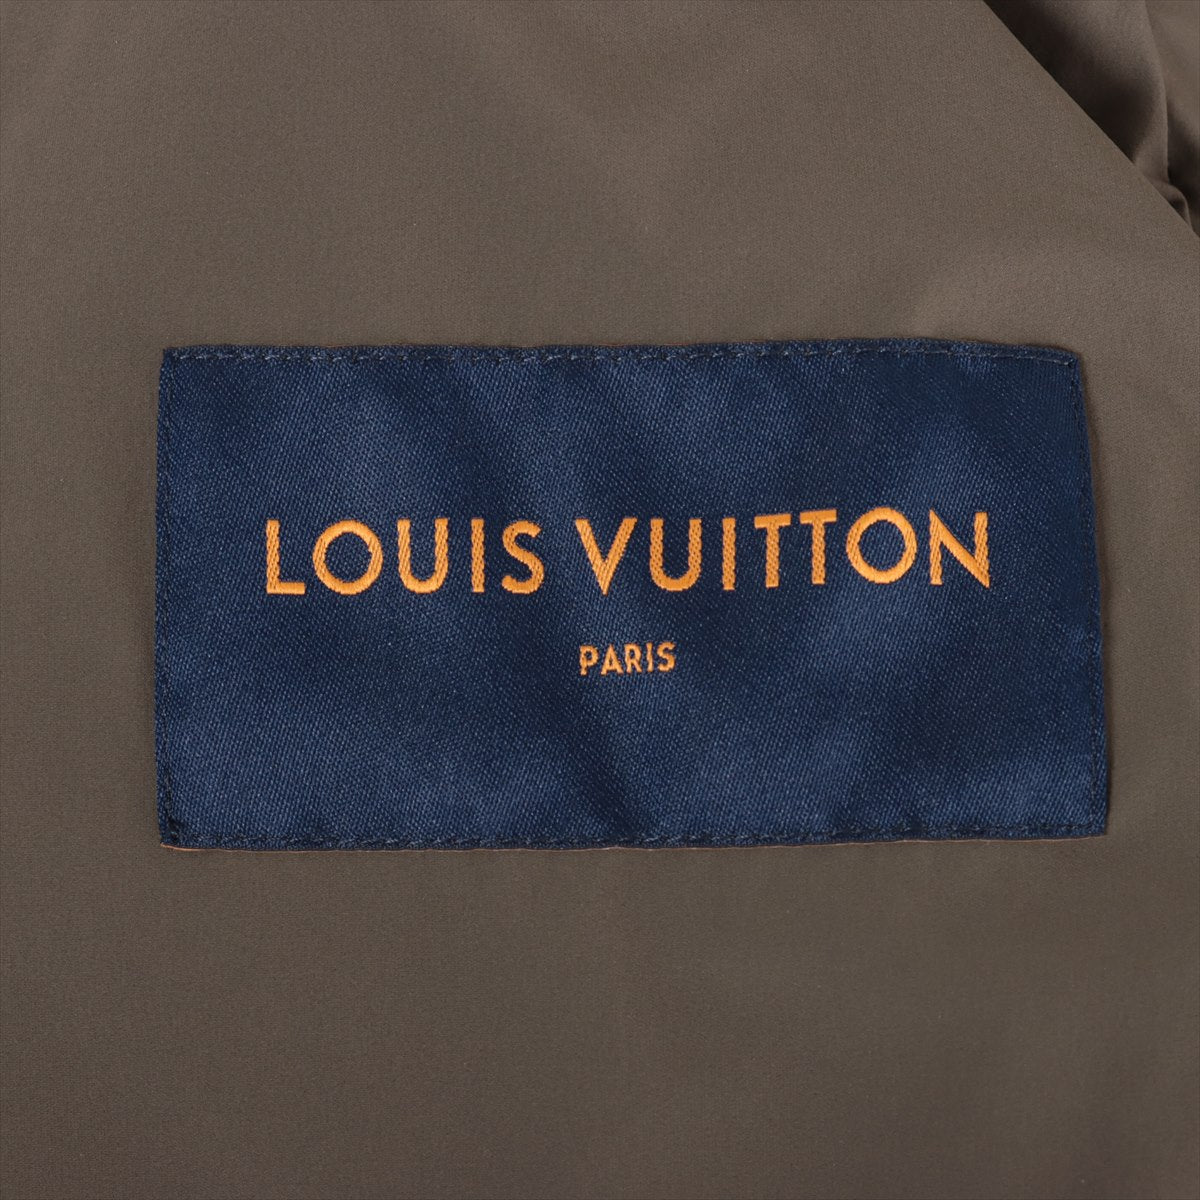 Louis Vuitton Nylon Insulated jacket 48 Men's Khaki  LVSE flower quilted hoodie jacket 1AAU90 RM231Q Accessory (transparent tag) missing